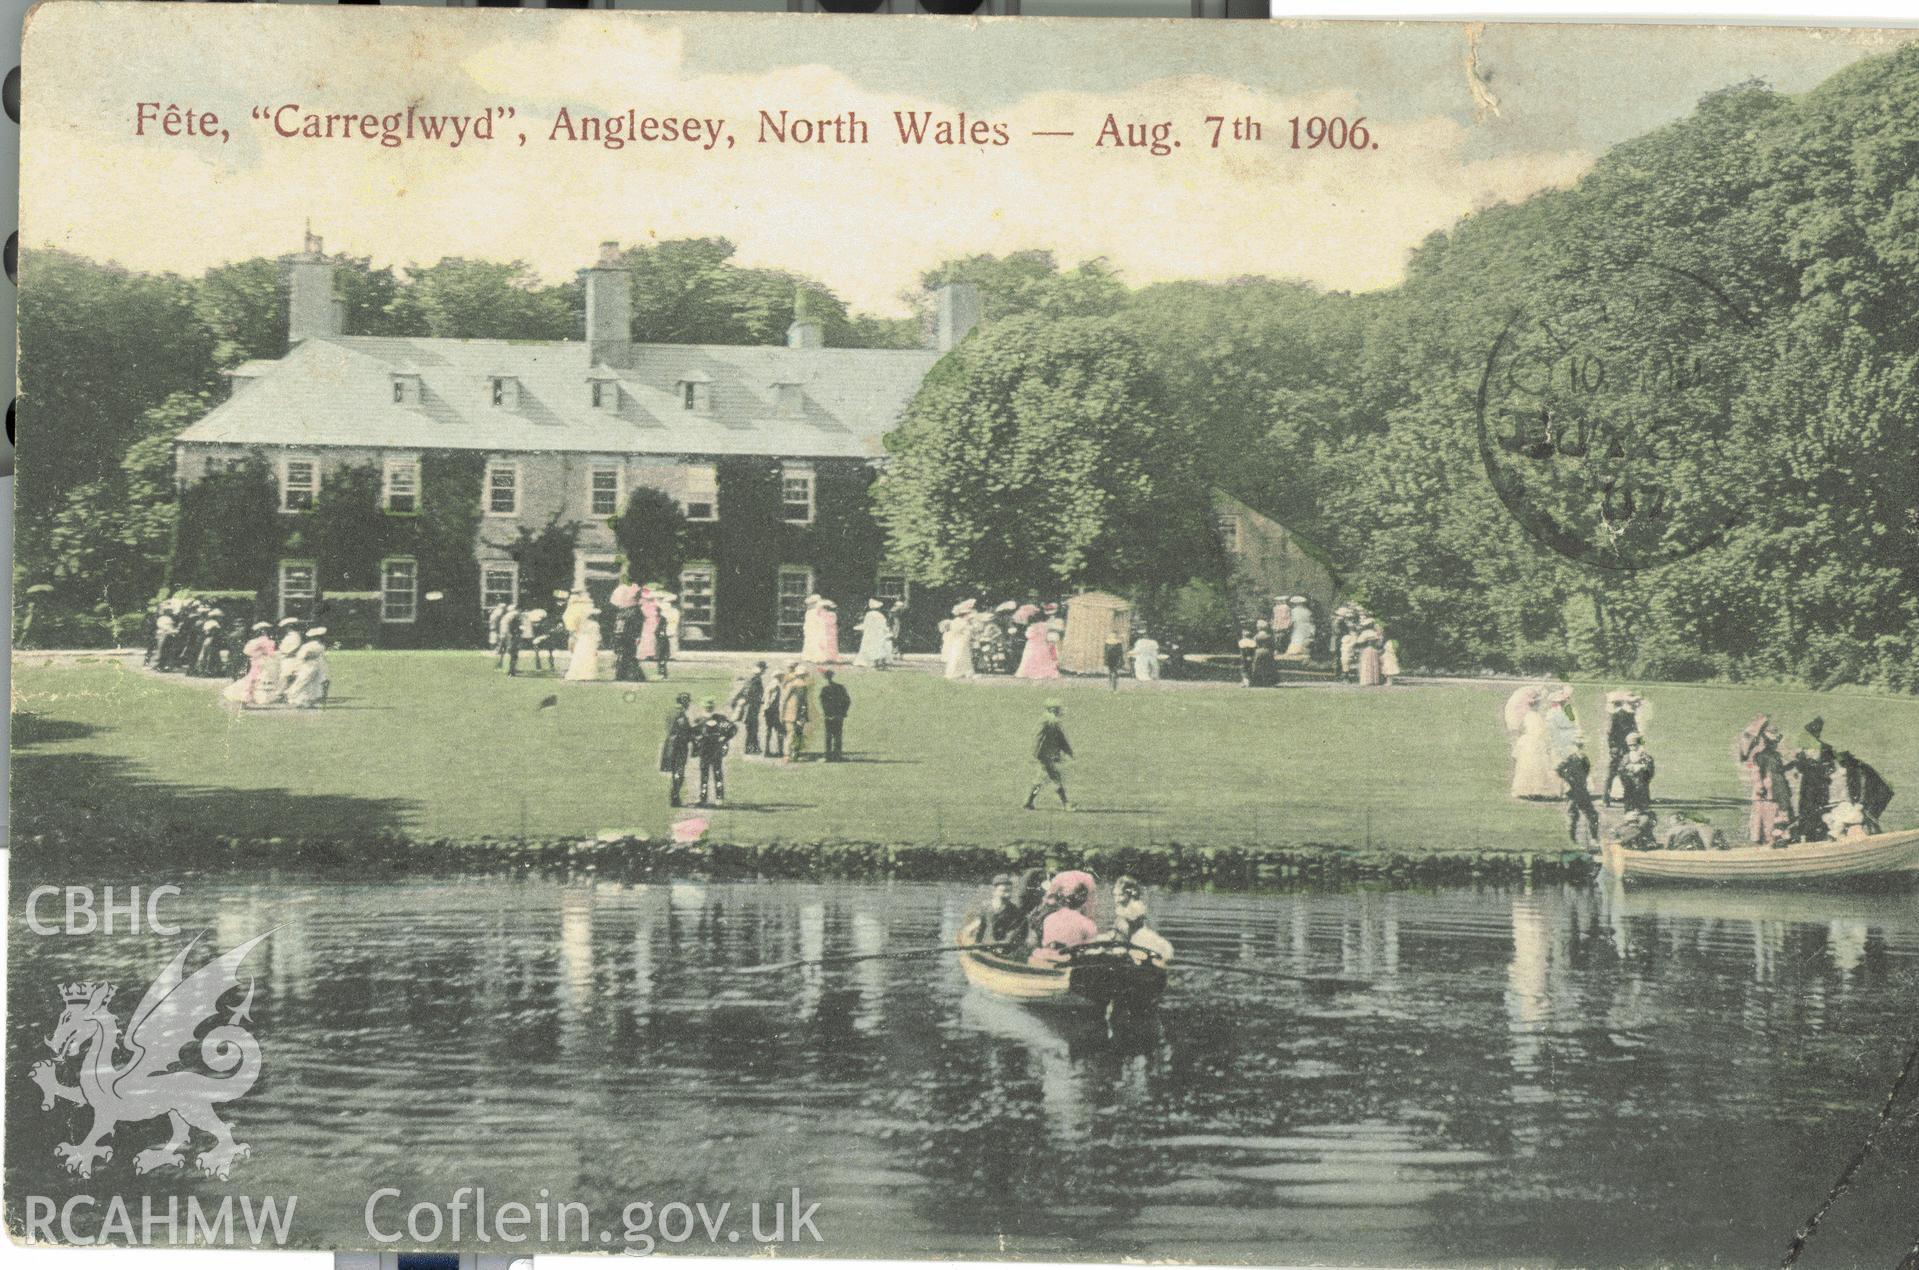 Digitised postcard image of fete at Carreglwyd, Llanfaethlu, M & M Jones, Anglesia. Produced by Parks and Gardens Data Services, from an original item in the Peter Davis Collection at Parks and Gardens UK. We hold only web-resolution images of this collection, suitable for viewing on screen and for research purposes only. We do not hold the original images, or publication quality scans.